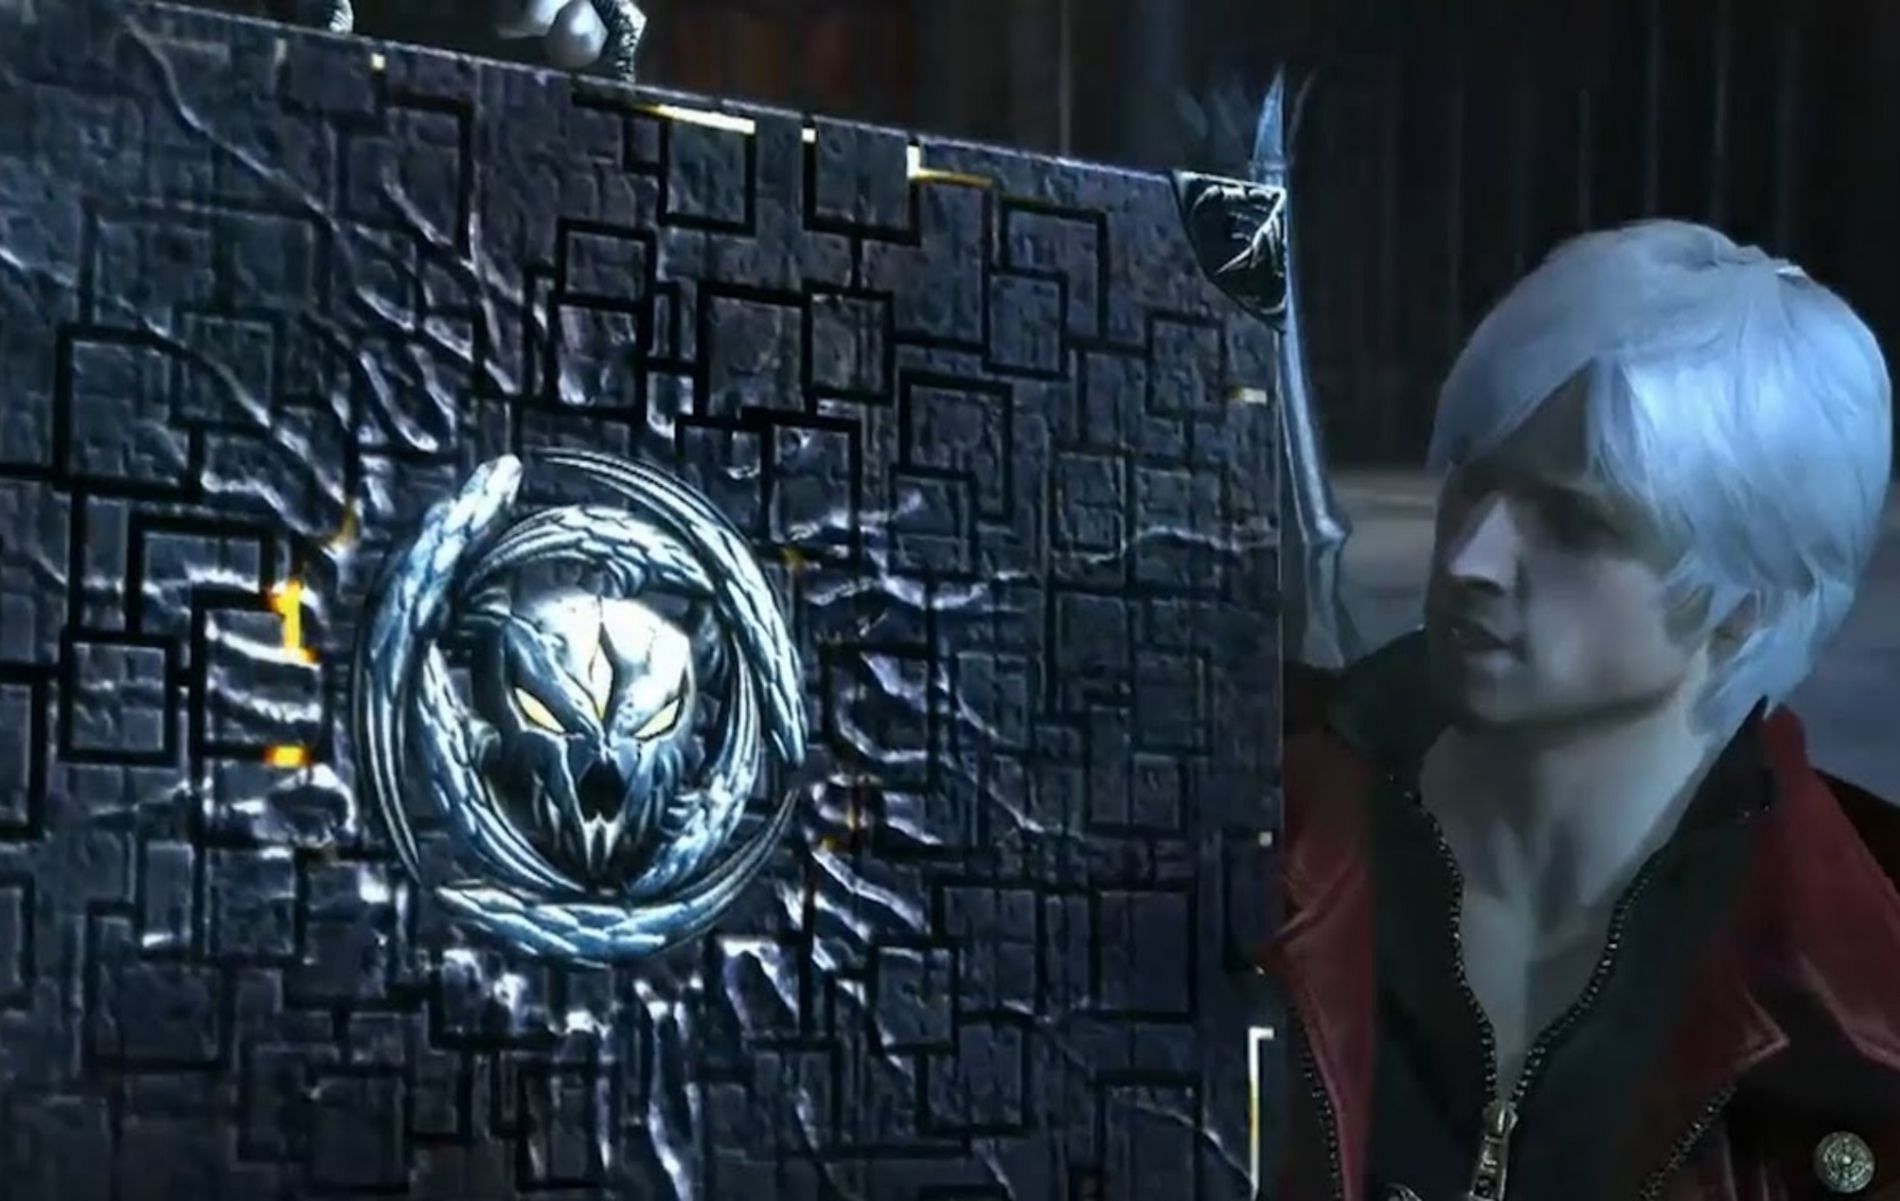 Pandora is one of the most unique weapons in video games (Image via Devil May Cry 4)